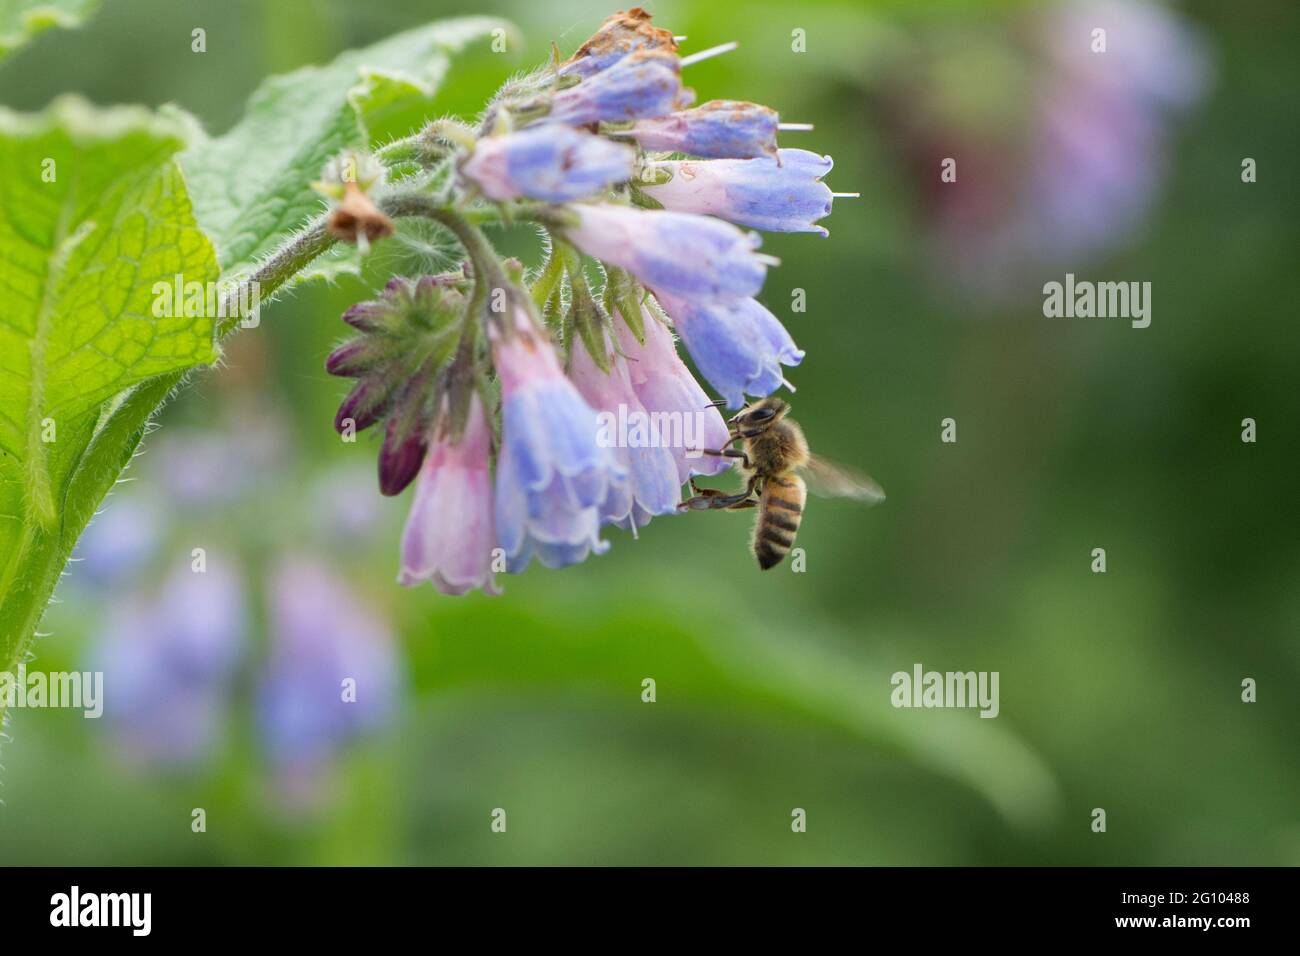 bee feeding on Symphytum officinale, Comfrey, close-up of flowers and ...